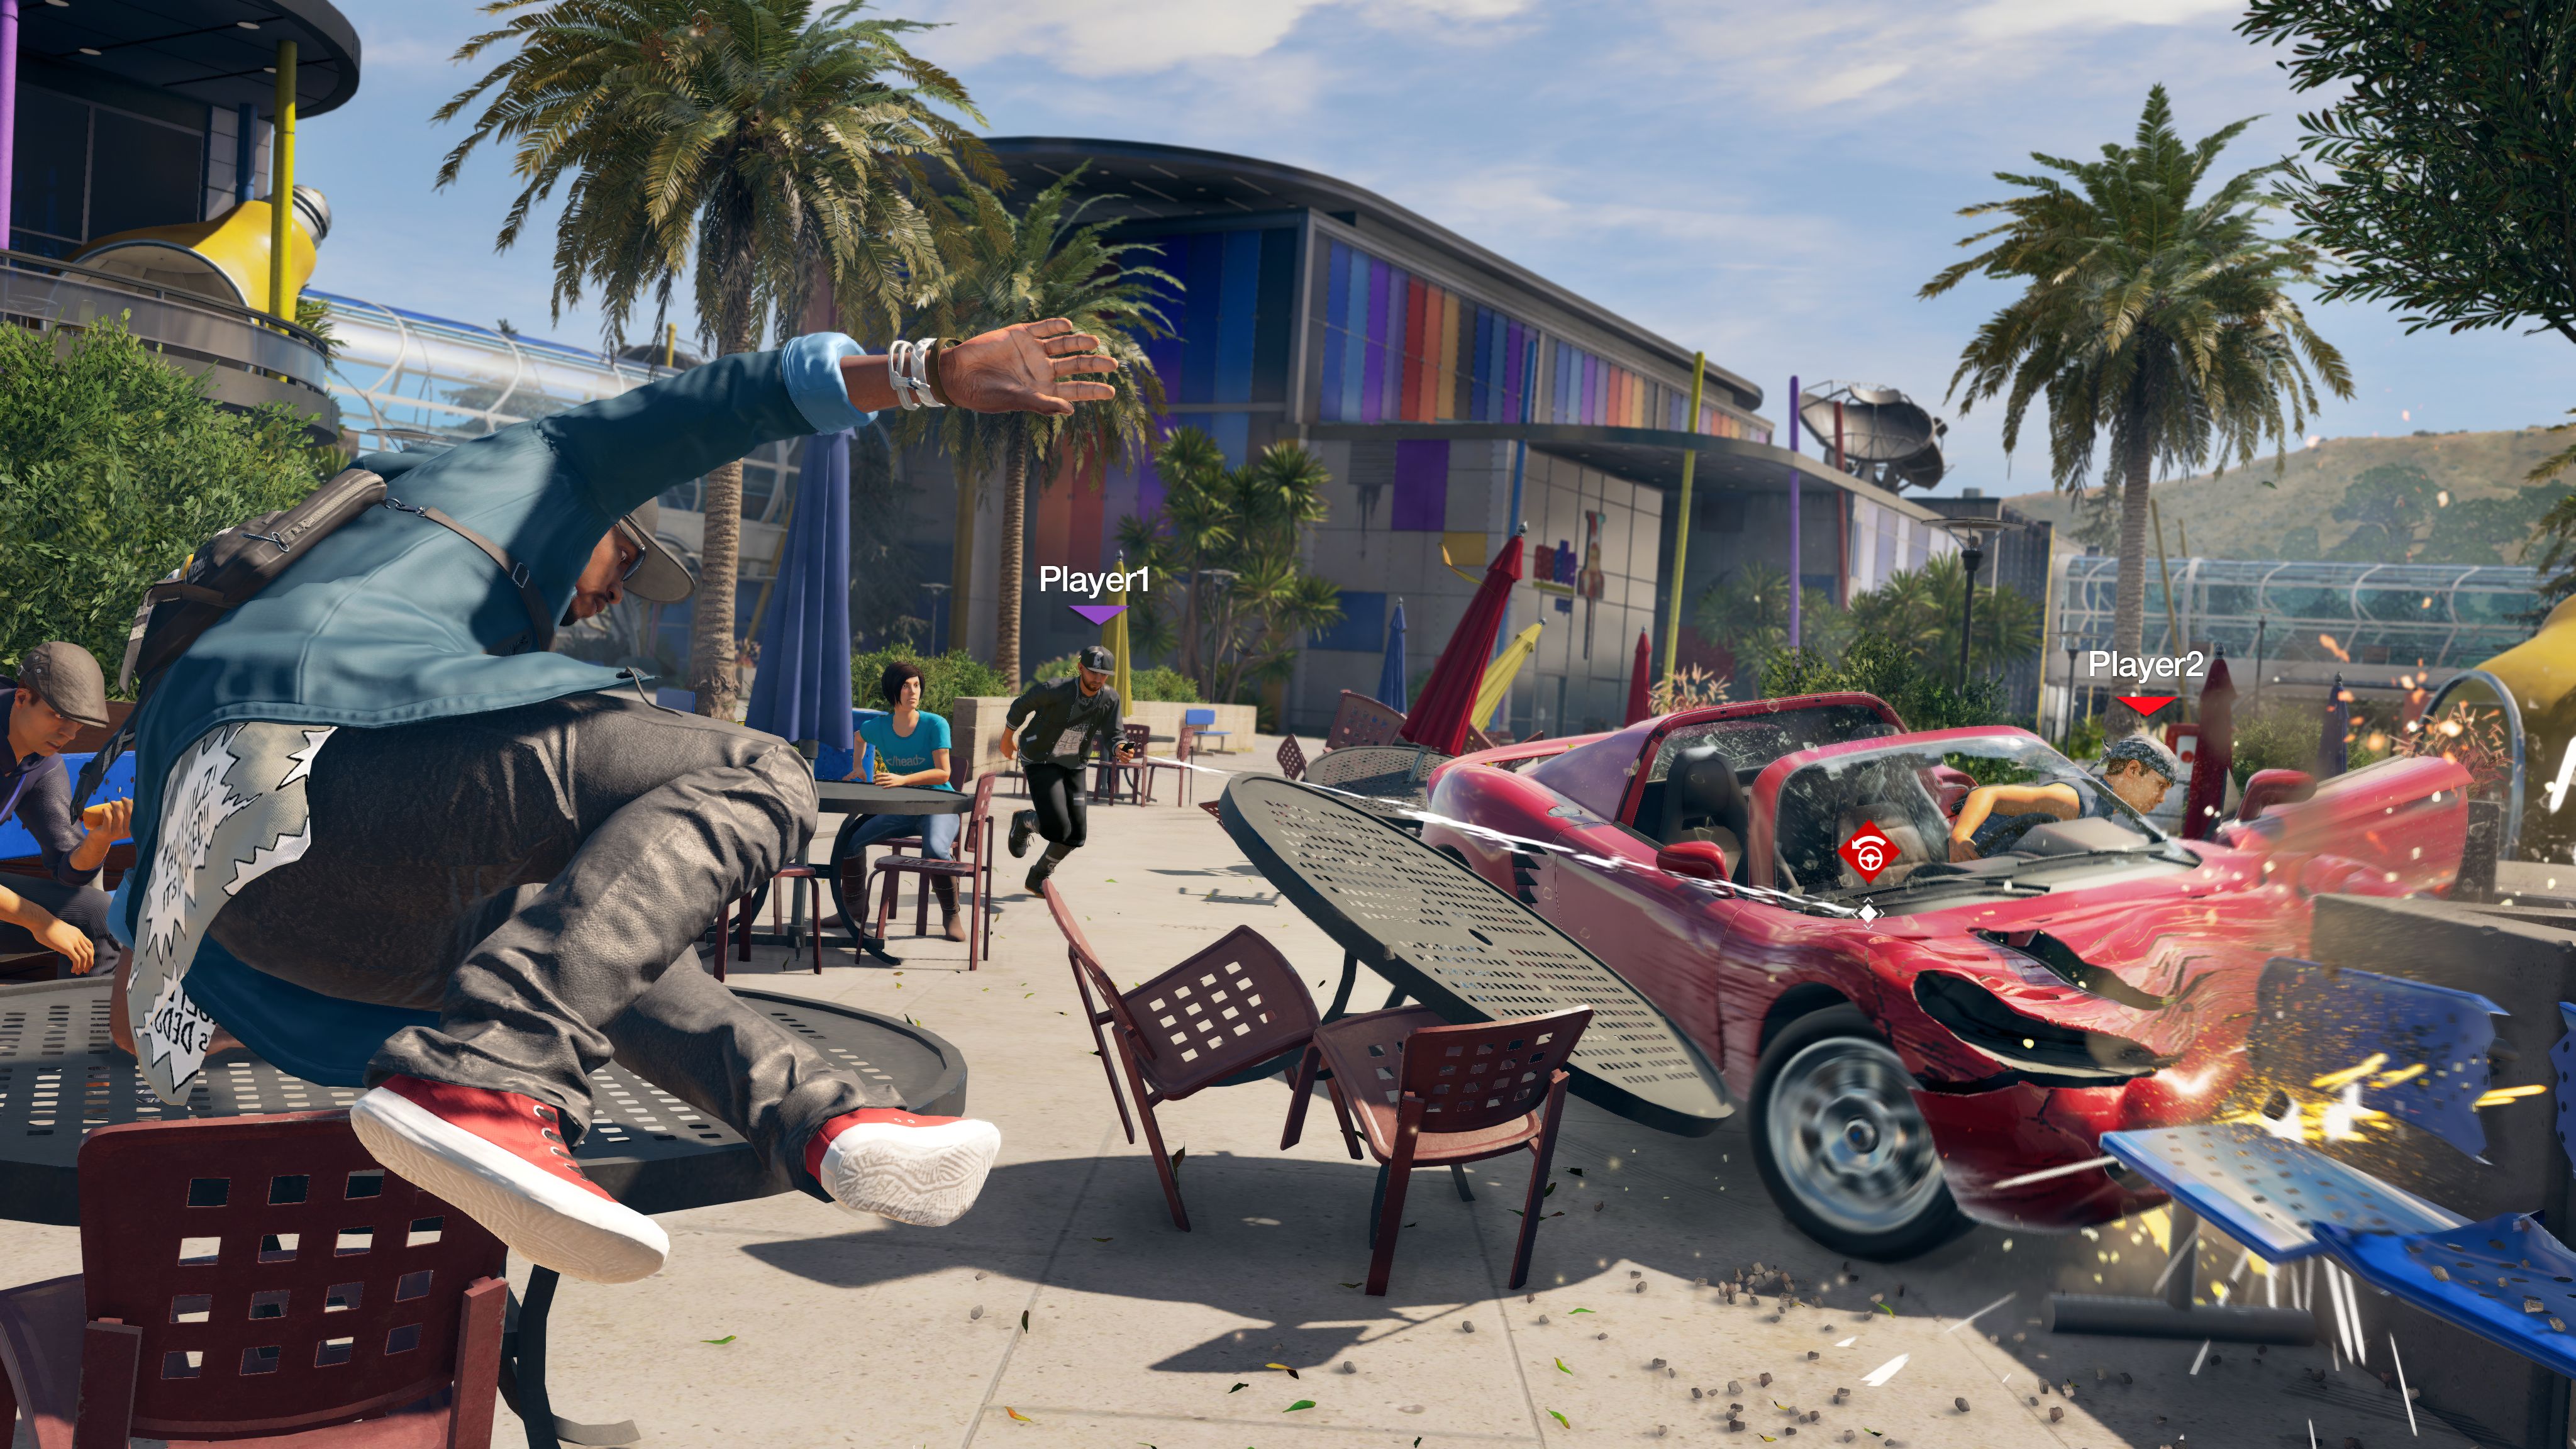 Blændende drikke gispende Watch Dogs 2 review: Hacking hell it's good